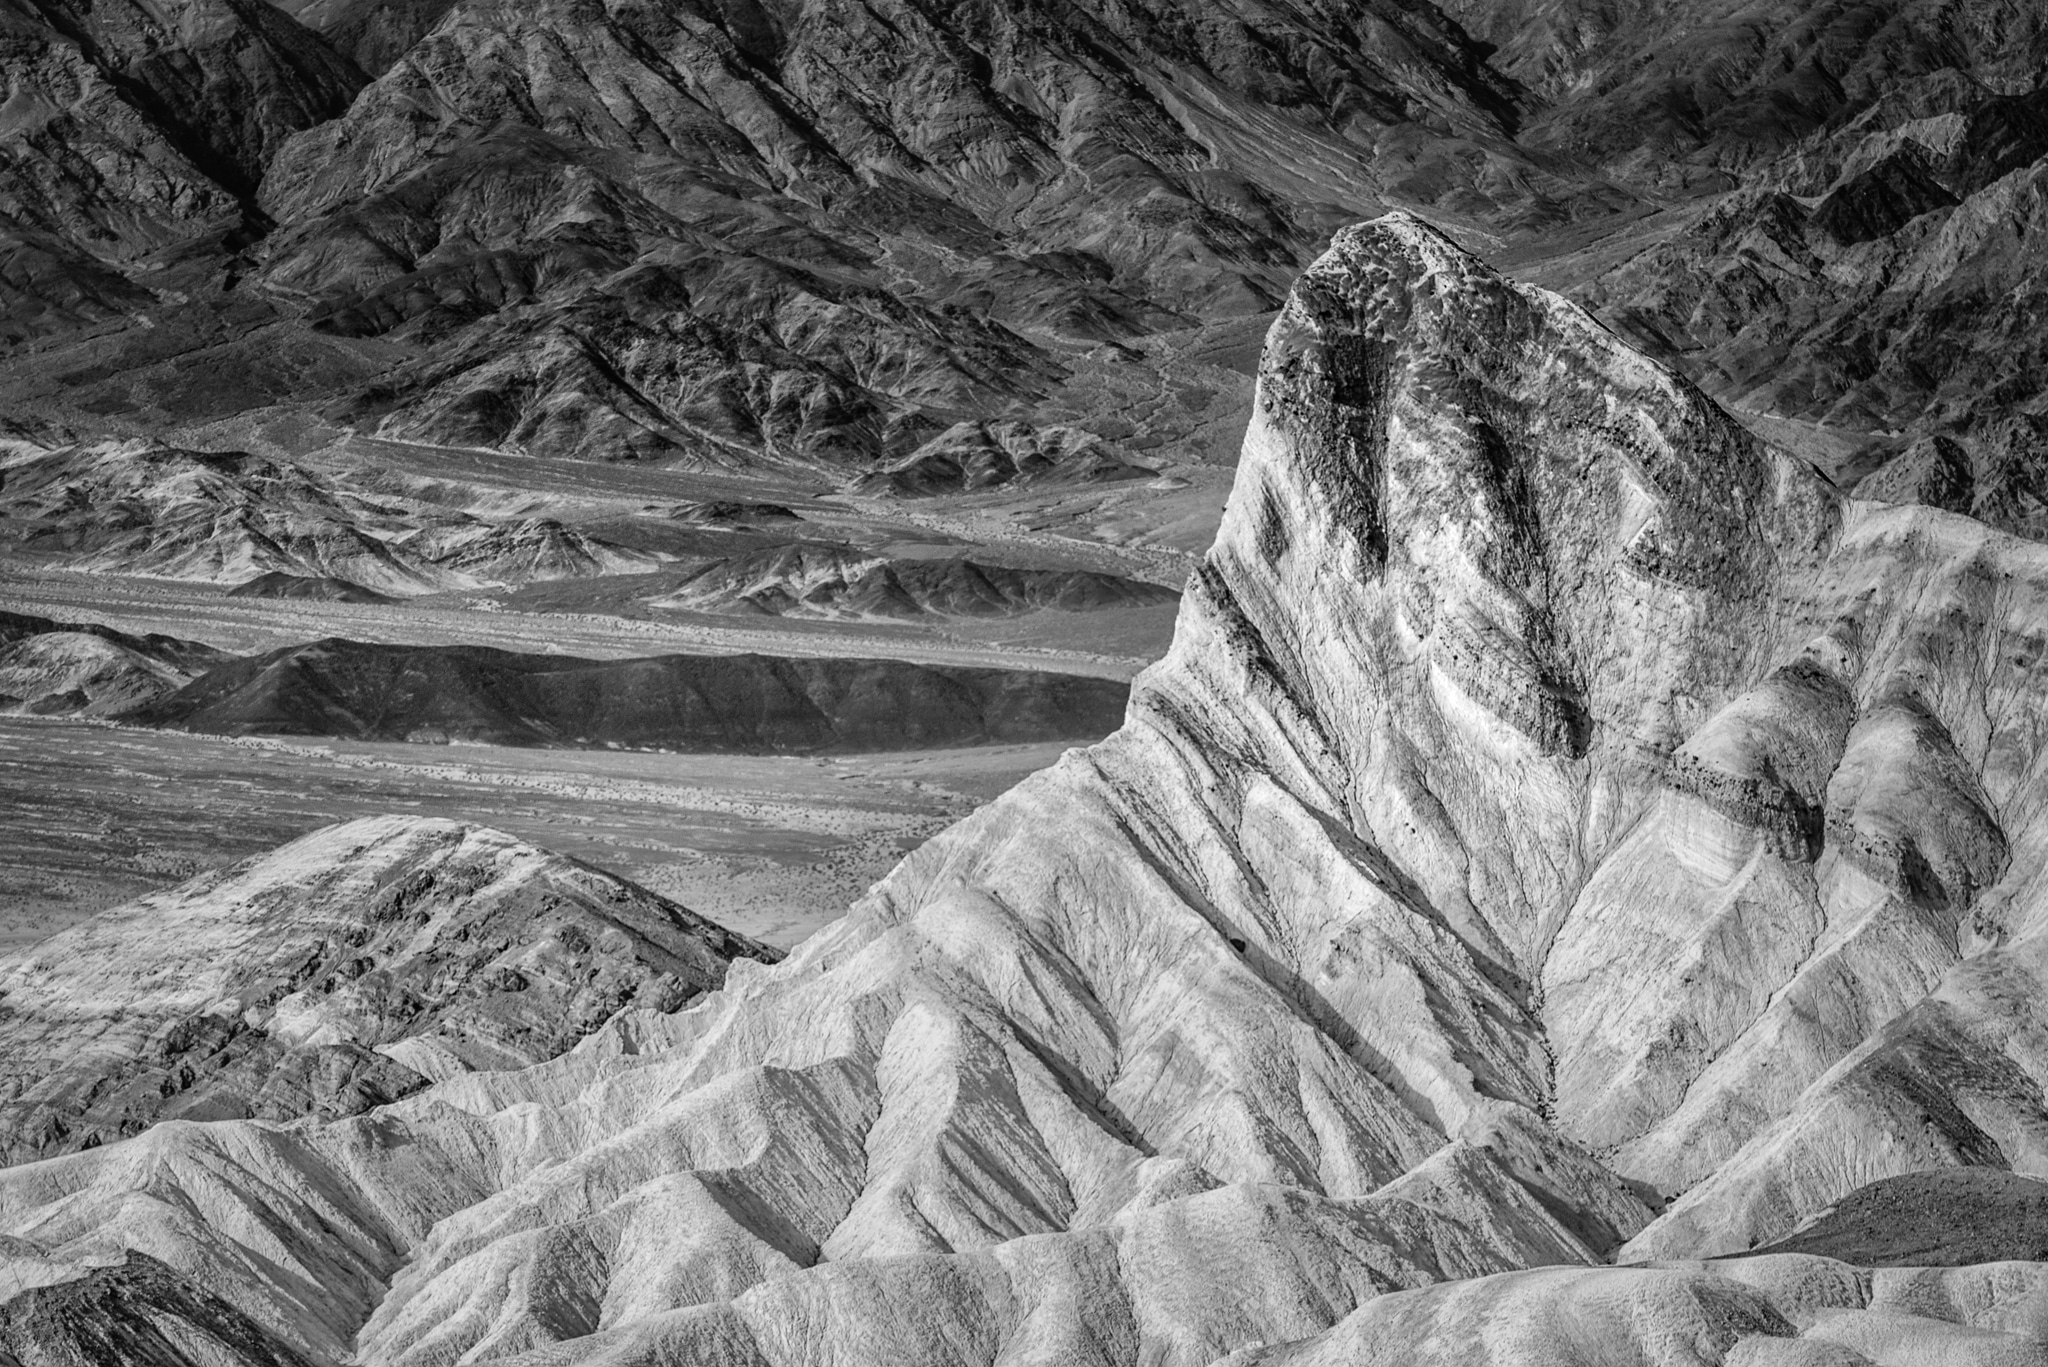 This black-and-white photograph features Manly Beacon. This viewpoint is accessible from the Zabriskie Point Overlook, which is accessible from Highway 190 in Death Valley National Park.